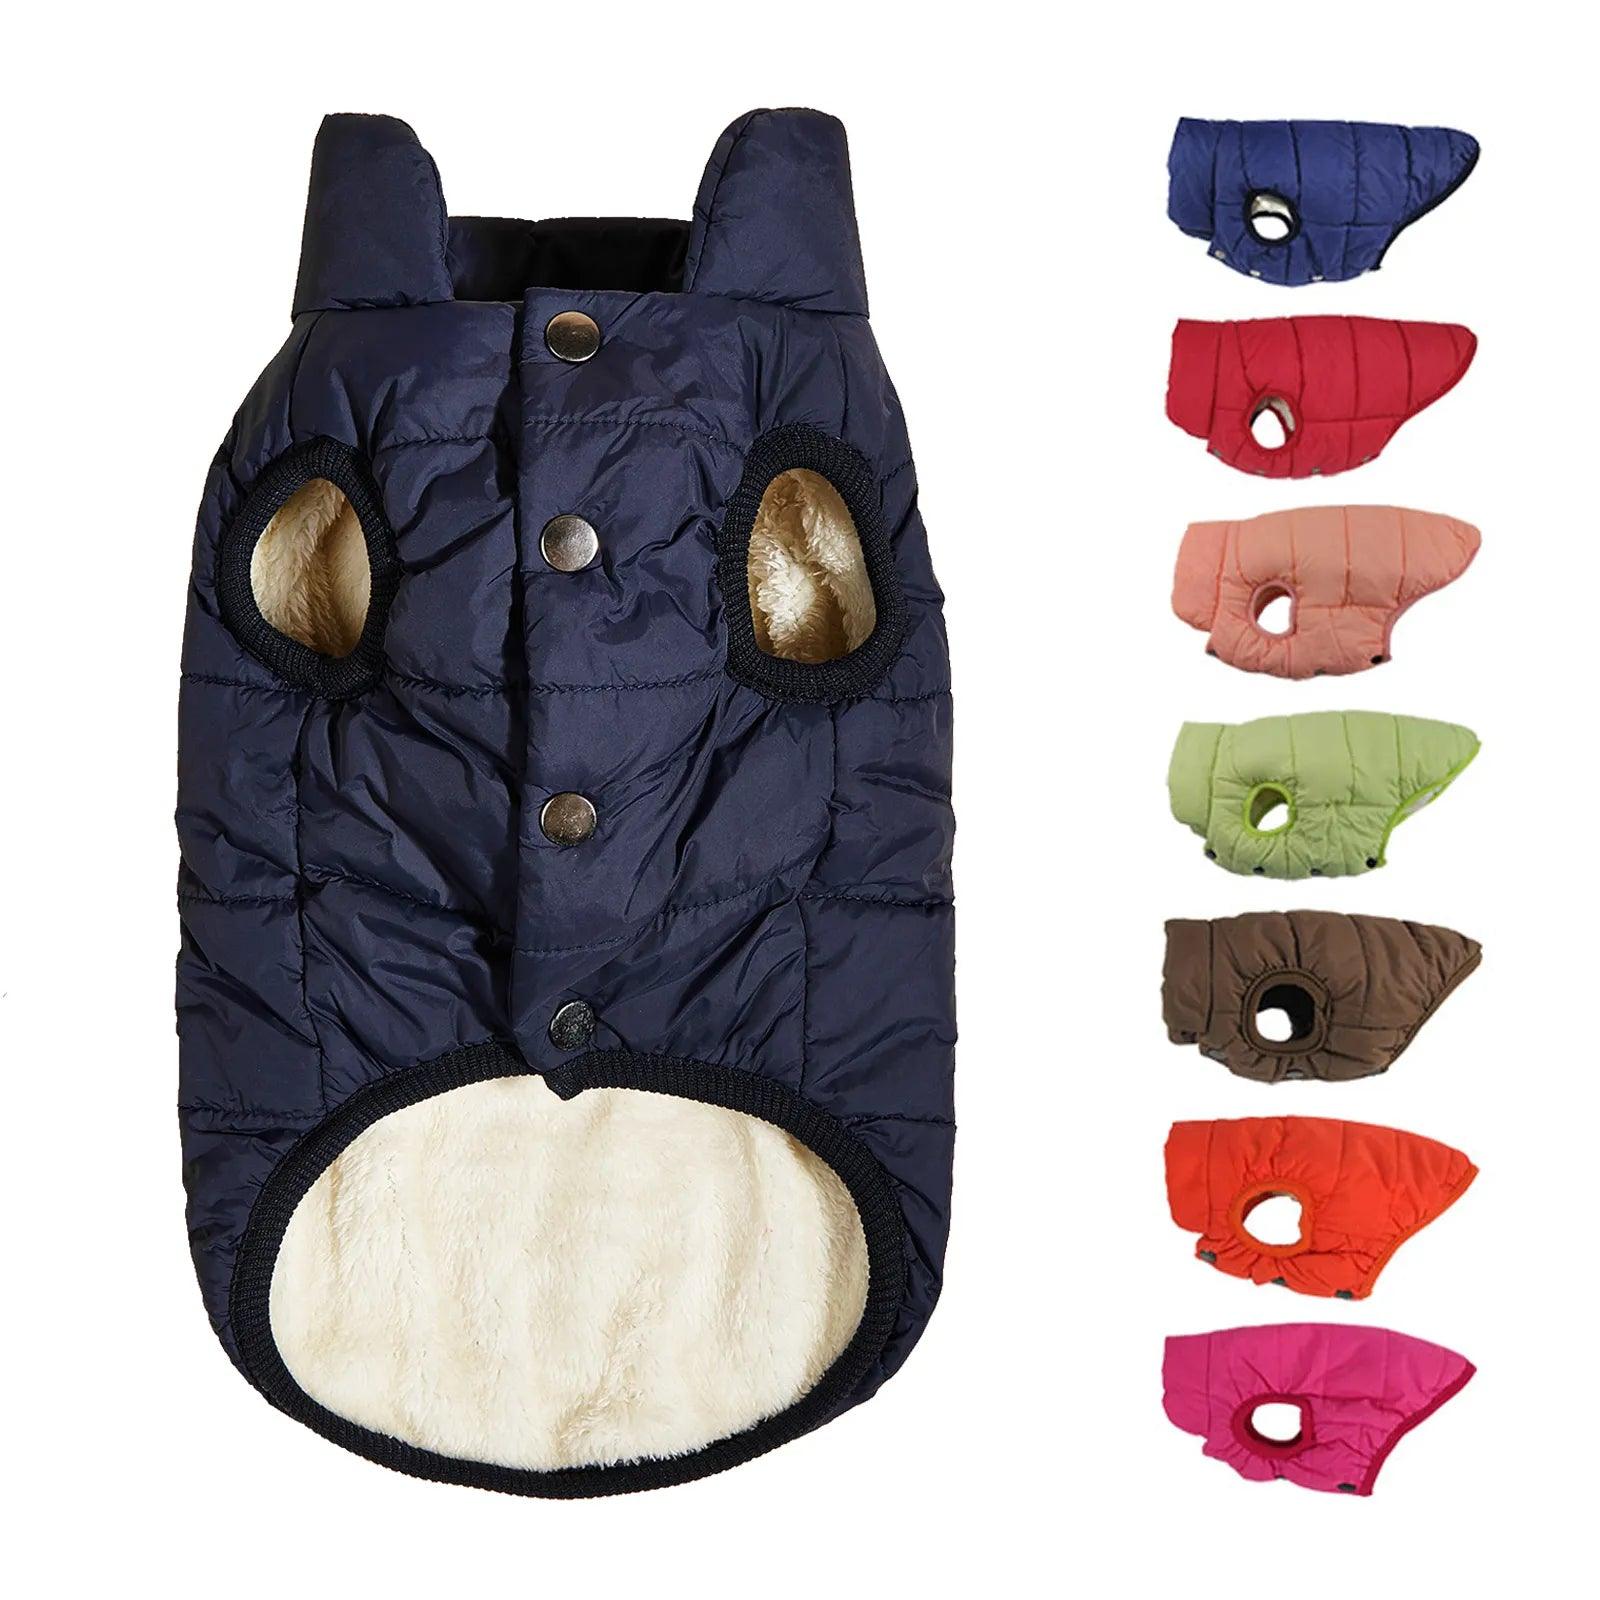 Cozy Winter Dog Jacket with Plush Inner Lining for French Bulldog Chihuahua Puppy  ourlum.com   